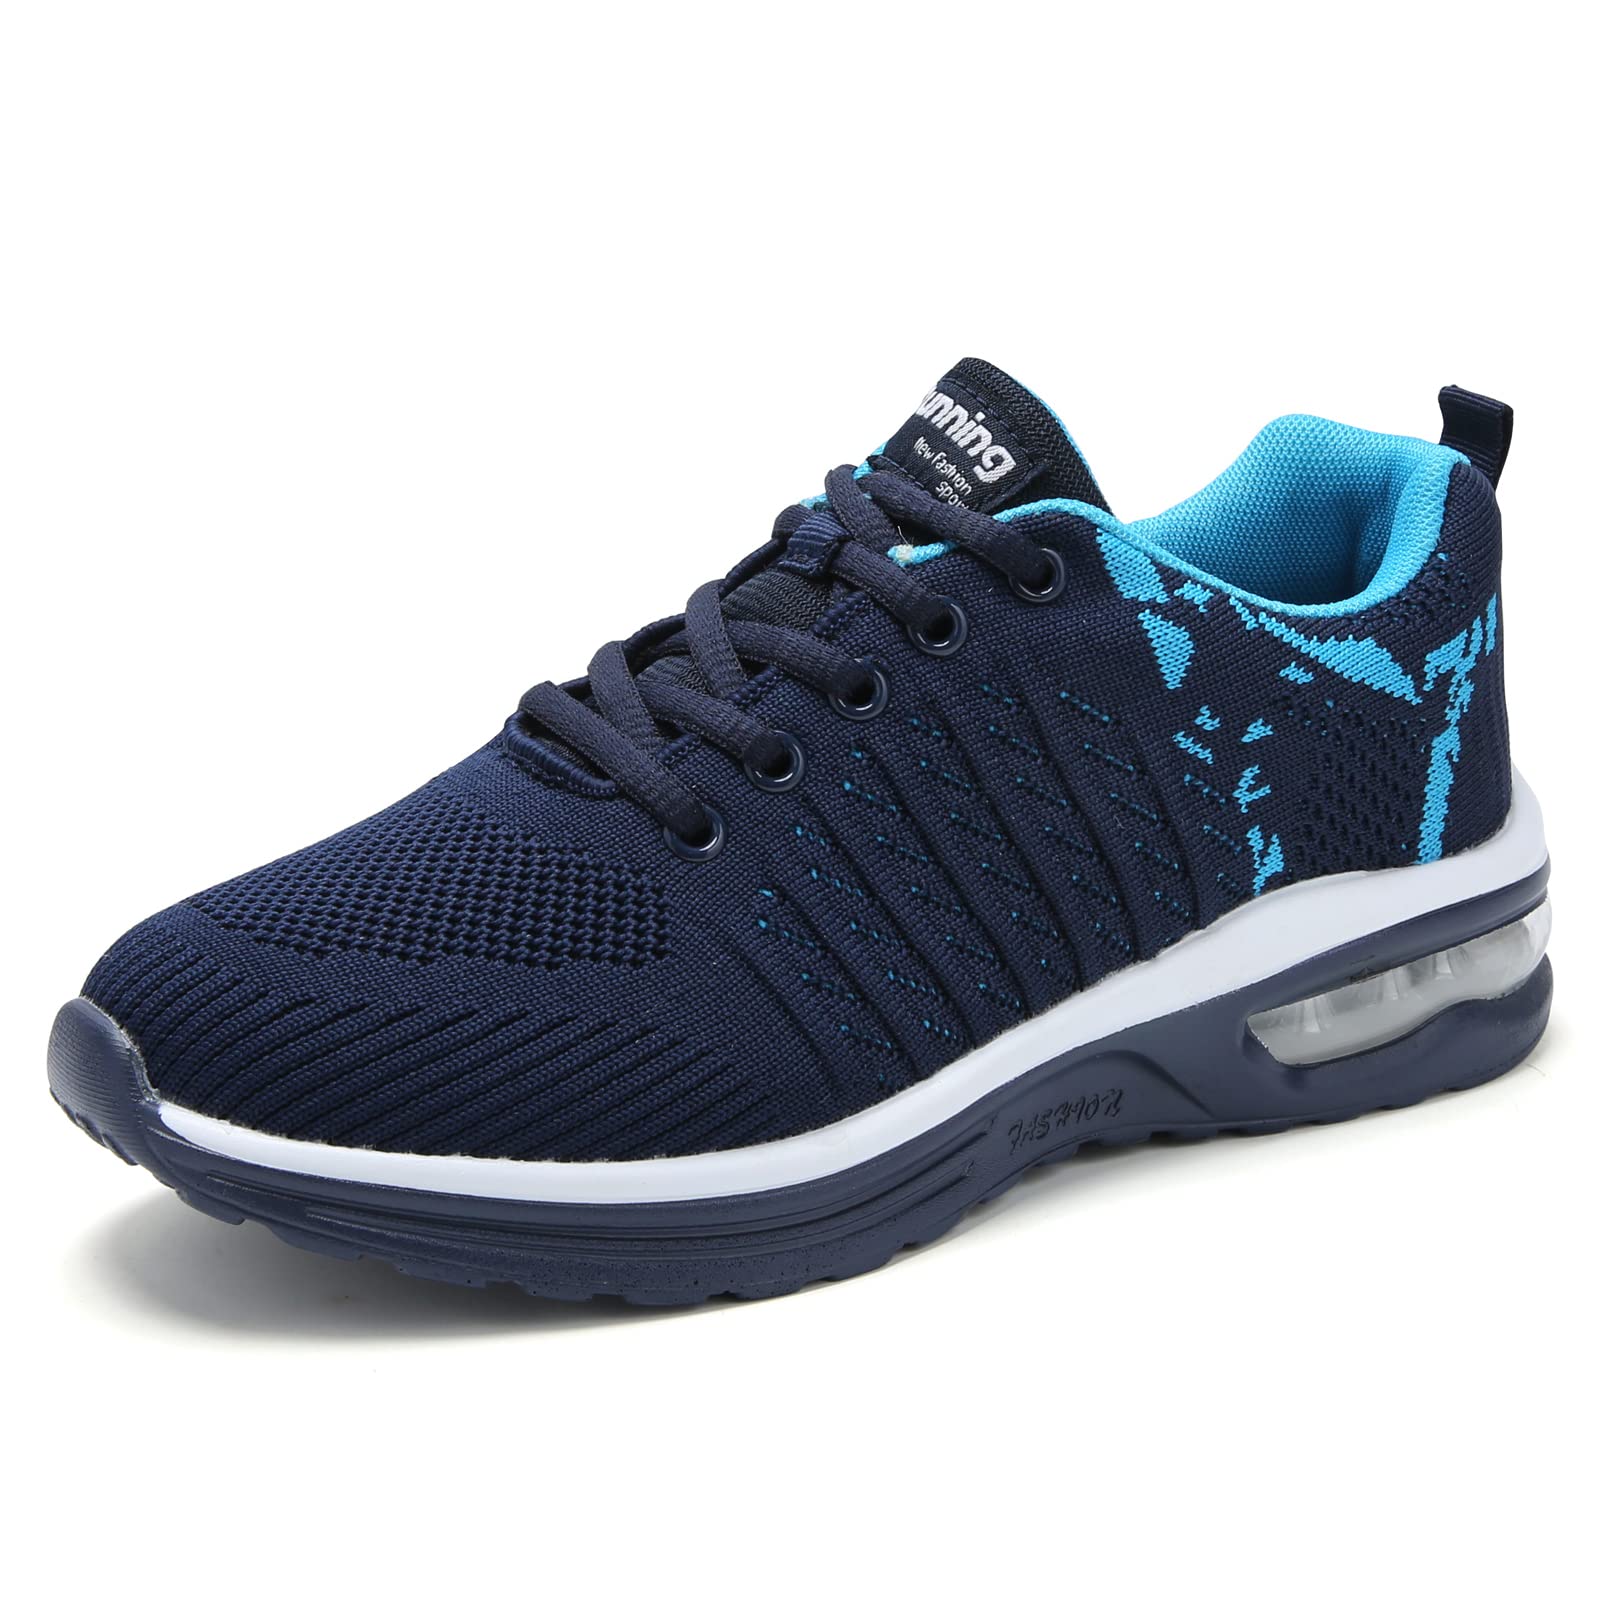 7 X RUNNING SHOES LADIES TRAINERS WOMENS TENNIS AIR CUSHION MESH BREATHABLE COMFORTABLE LIGHTWEIGHT SPORTS FITNESS GYM ATHLETIC NAVYBLUE UK 3.5 - TOTAL RRP £174: LOCATION - RACK C